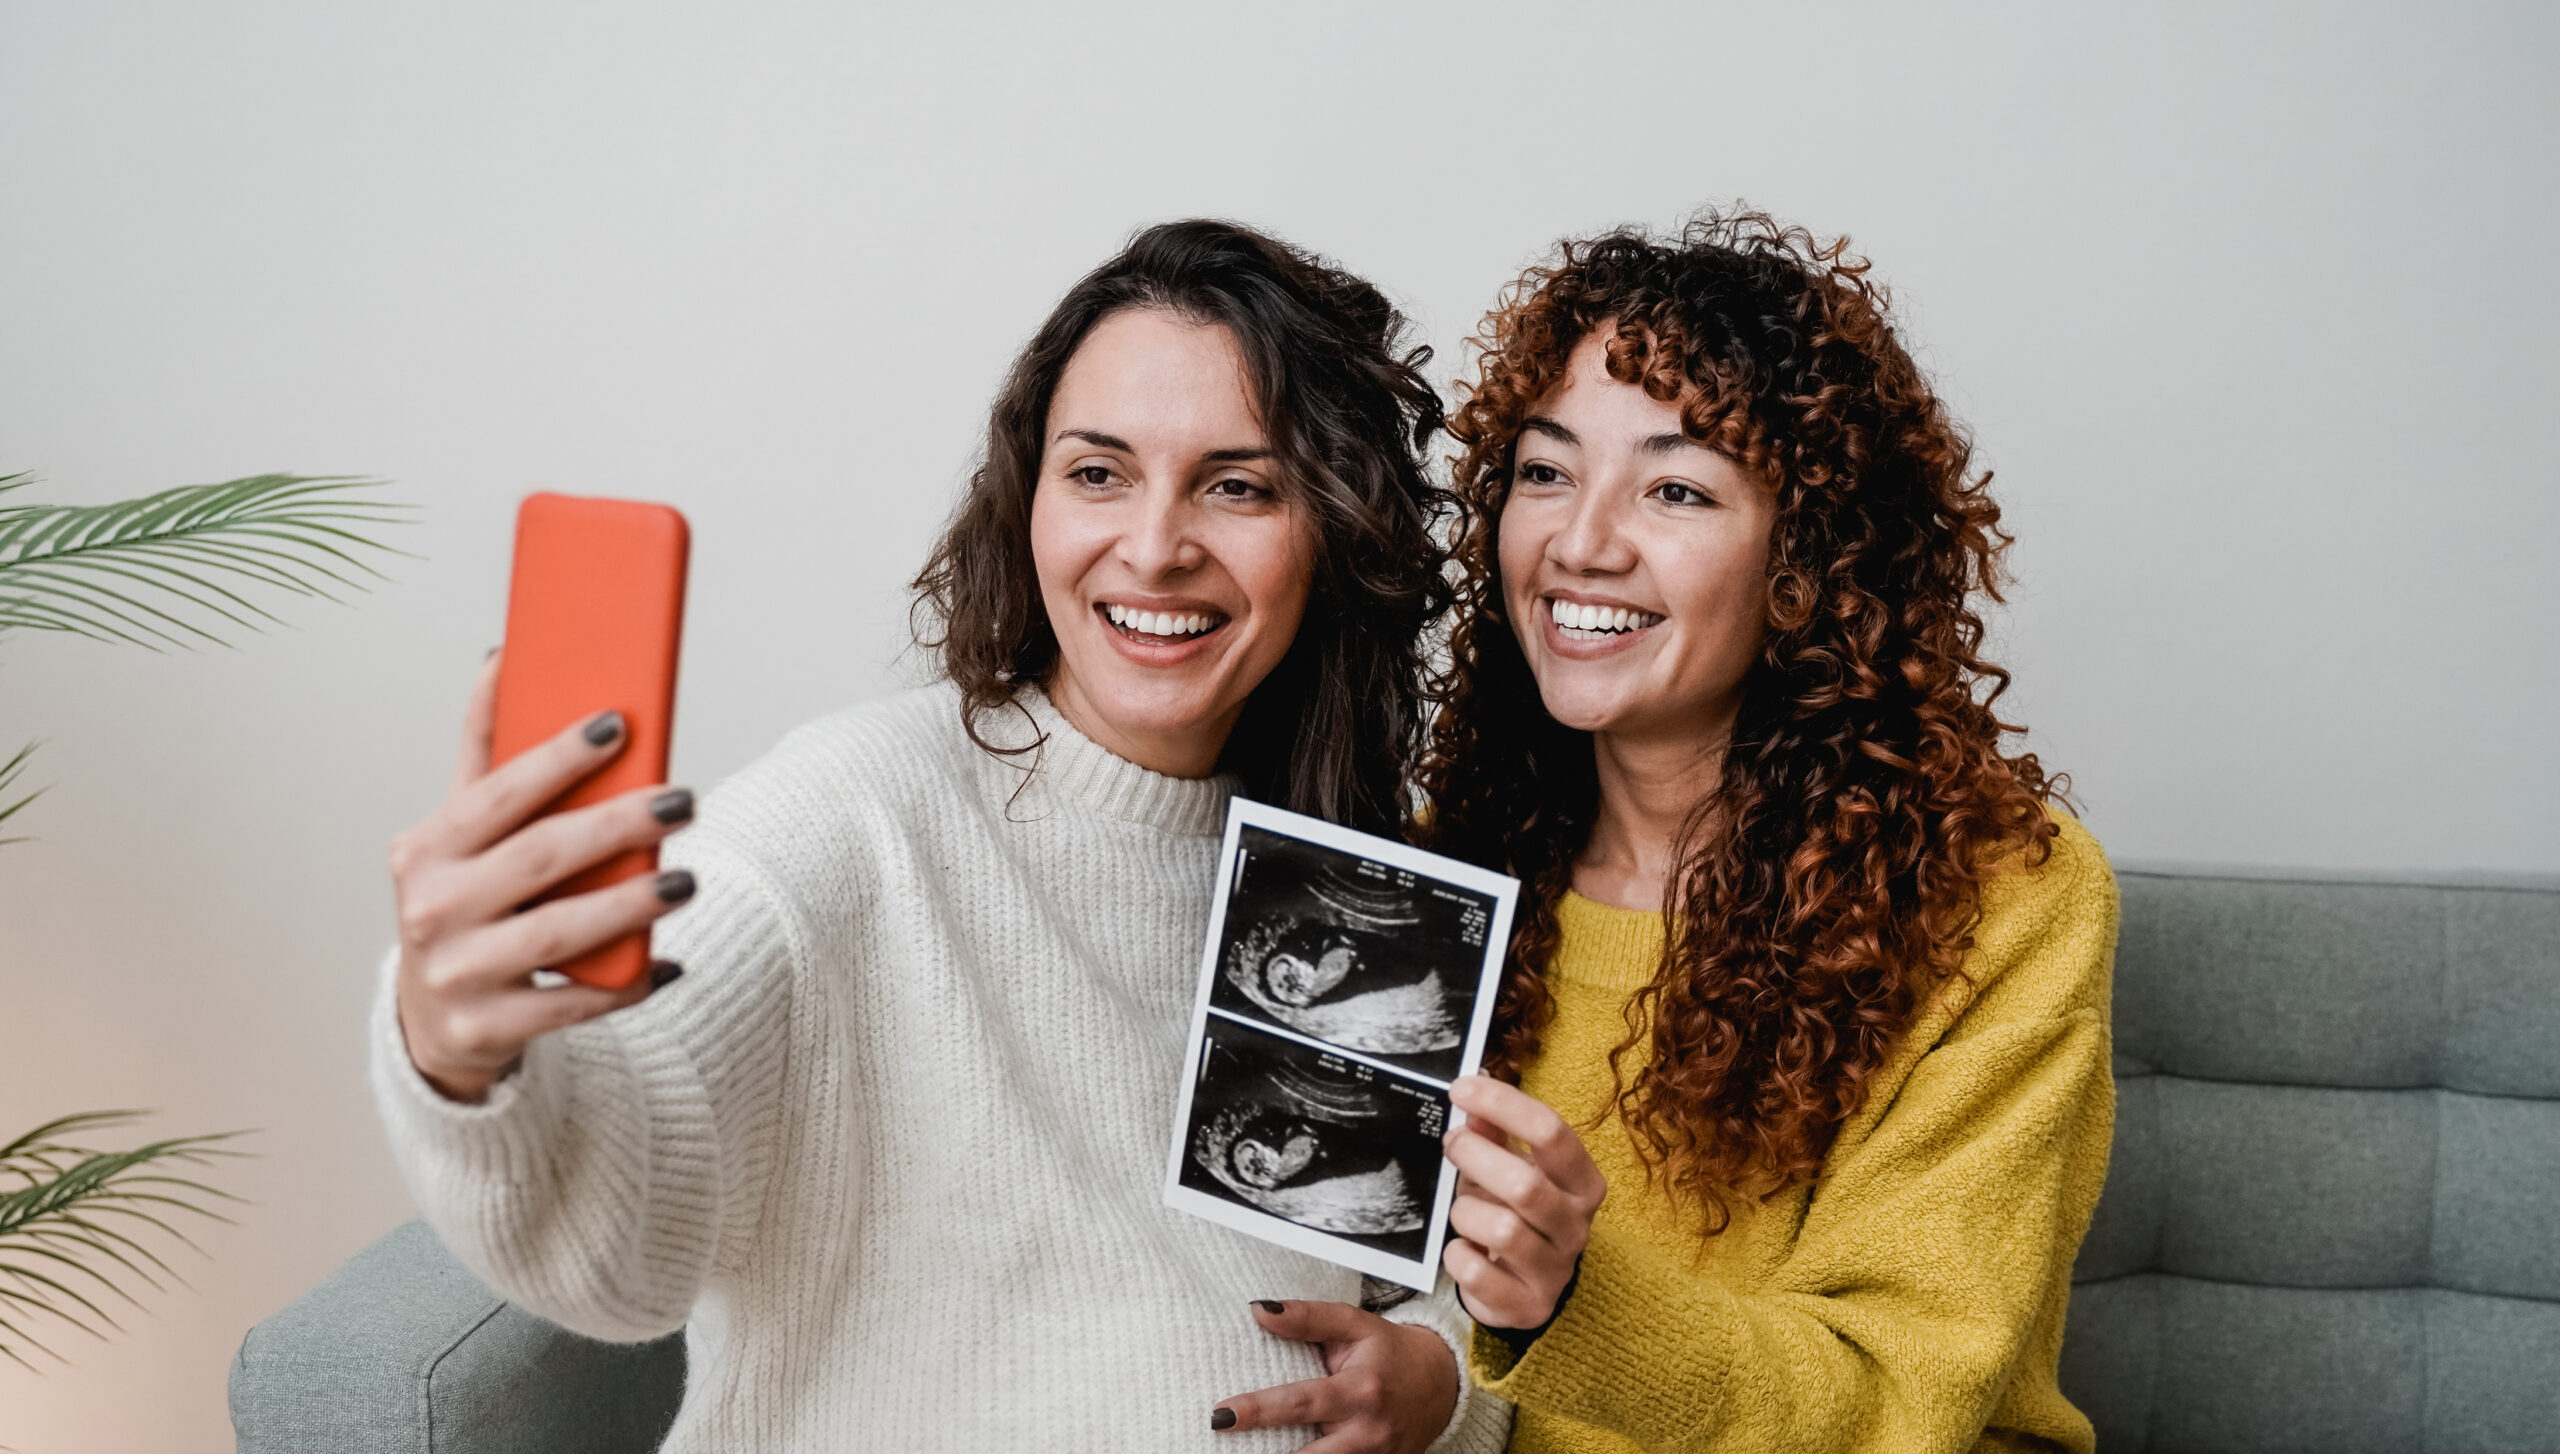 LGBT lesbian couple holding ultrasound photo after using donor sperm